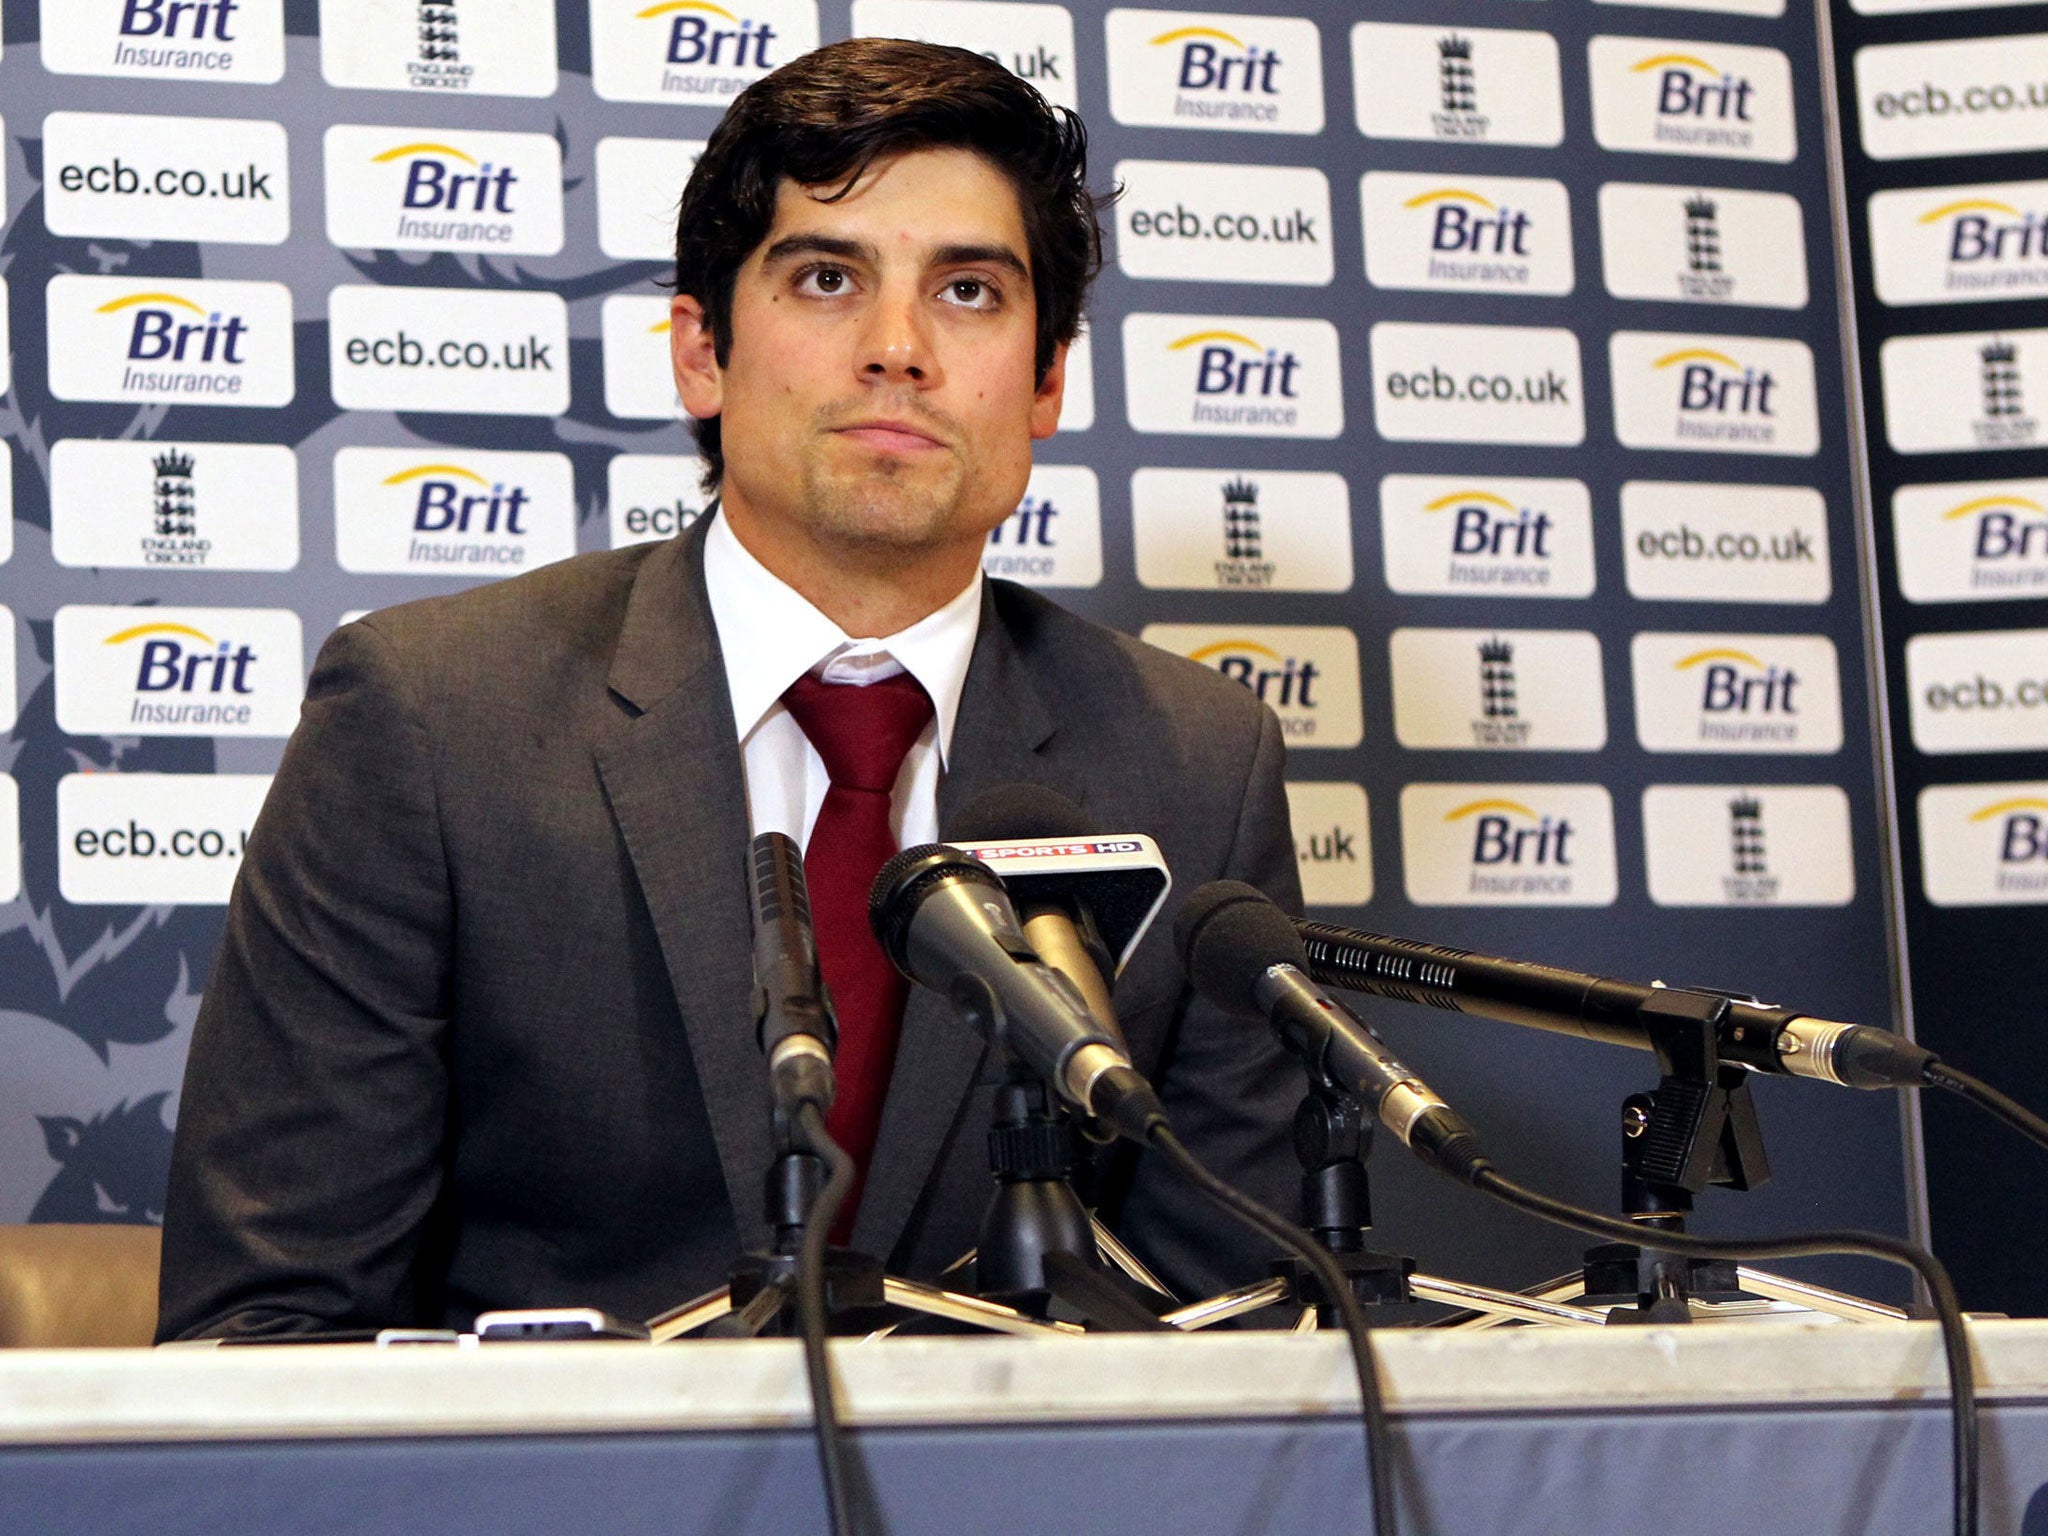 Alastair Cook: ‘I was surprised at how quickly we got to the top’